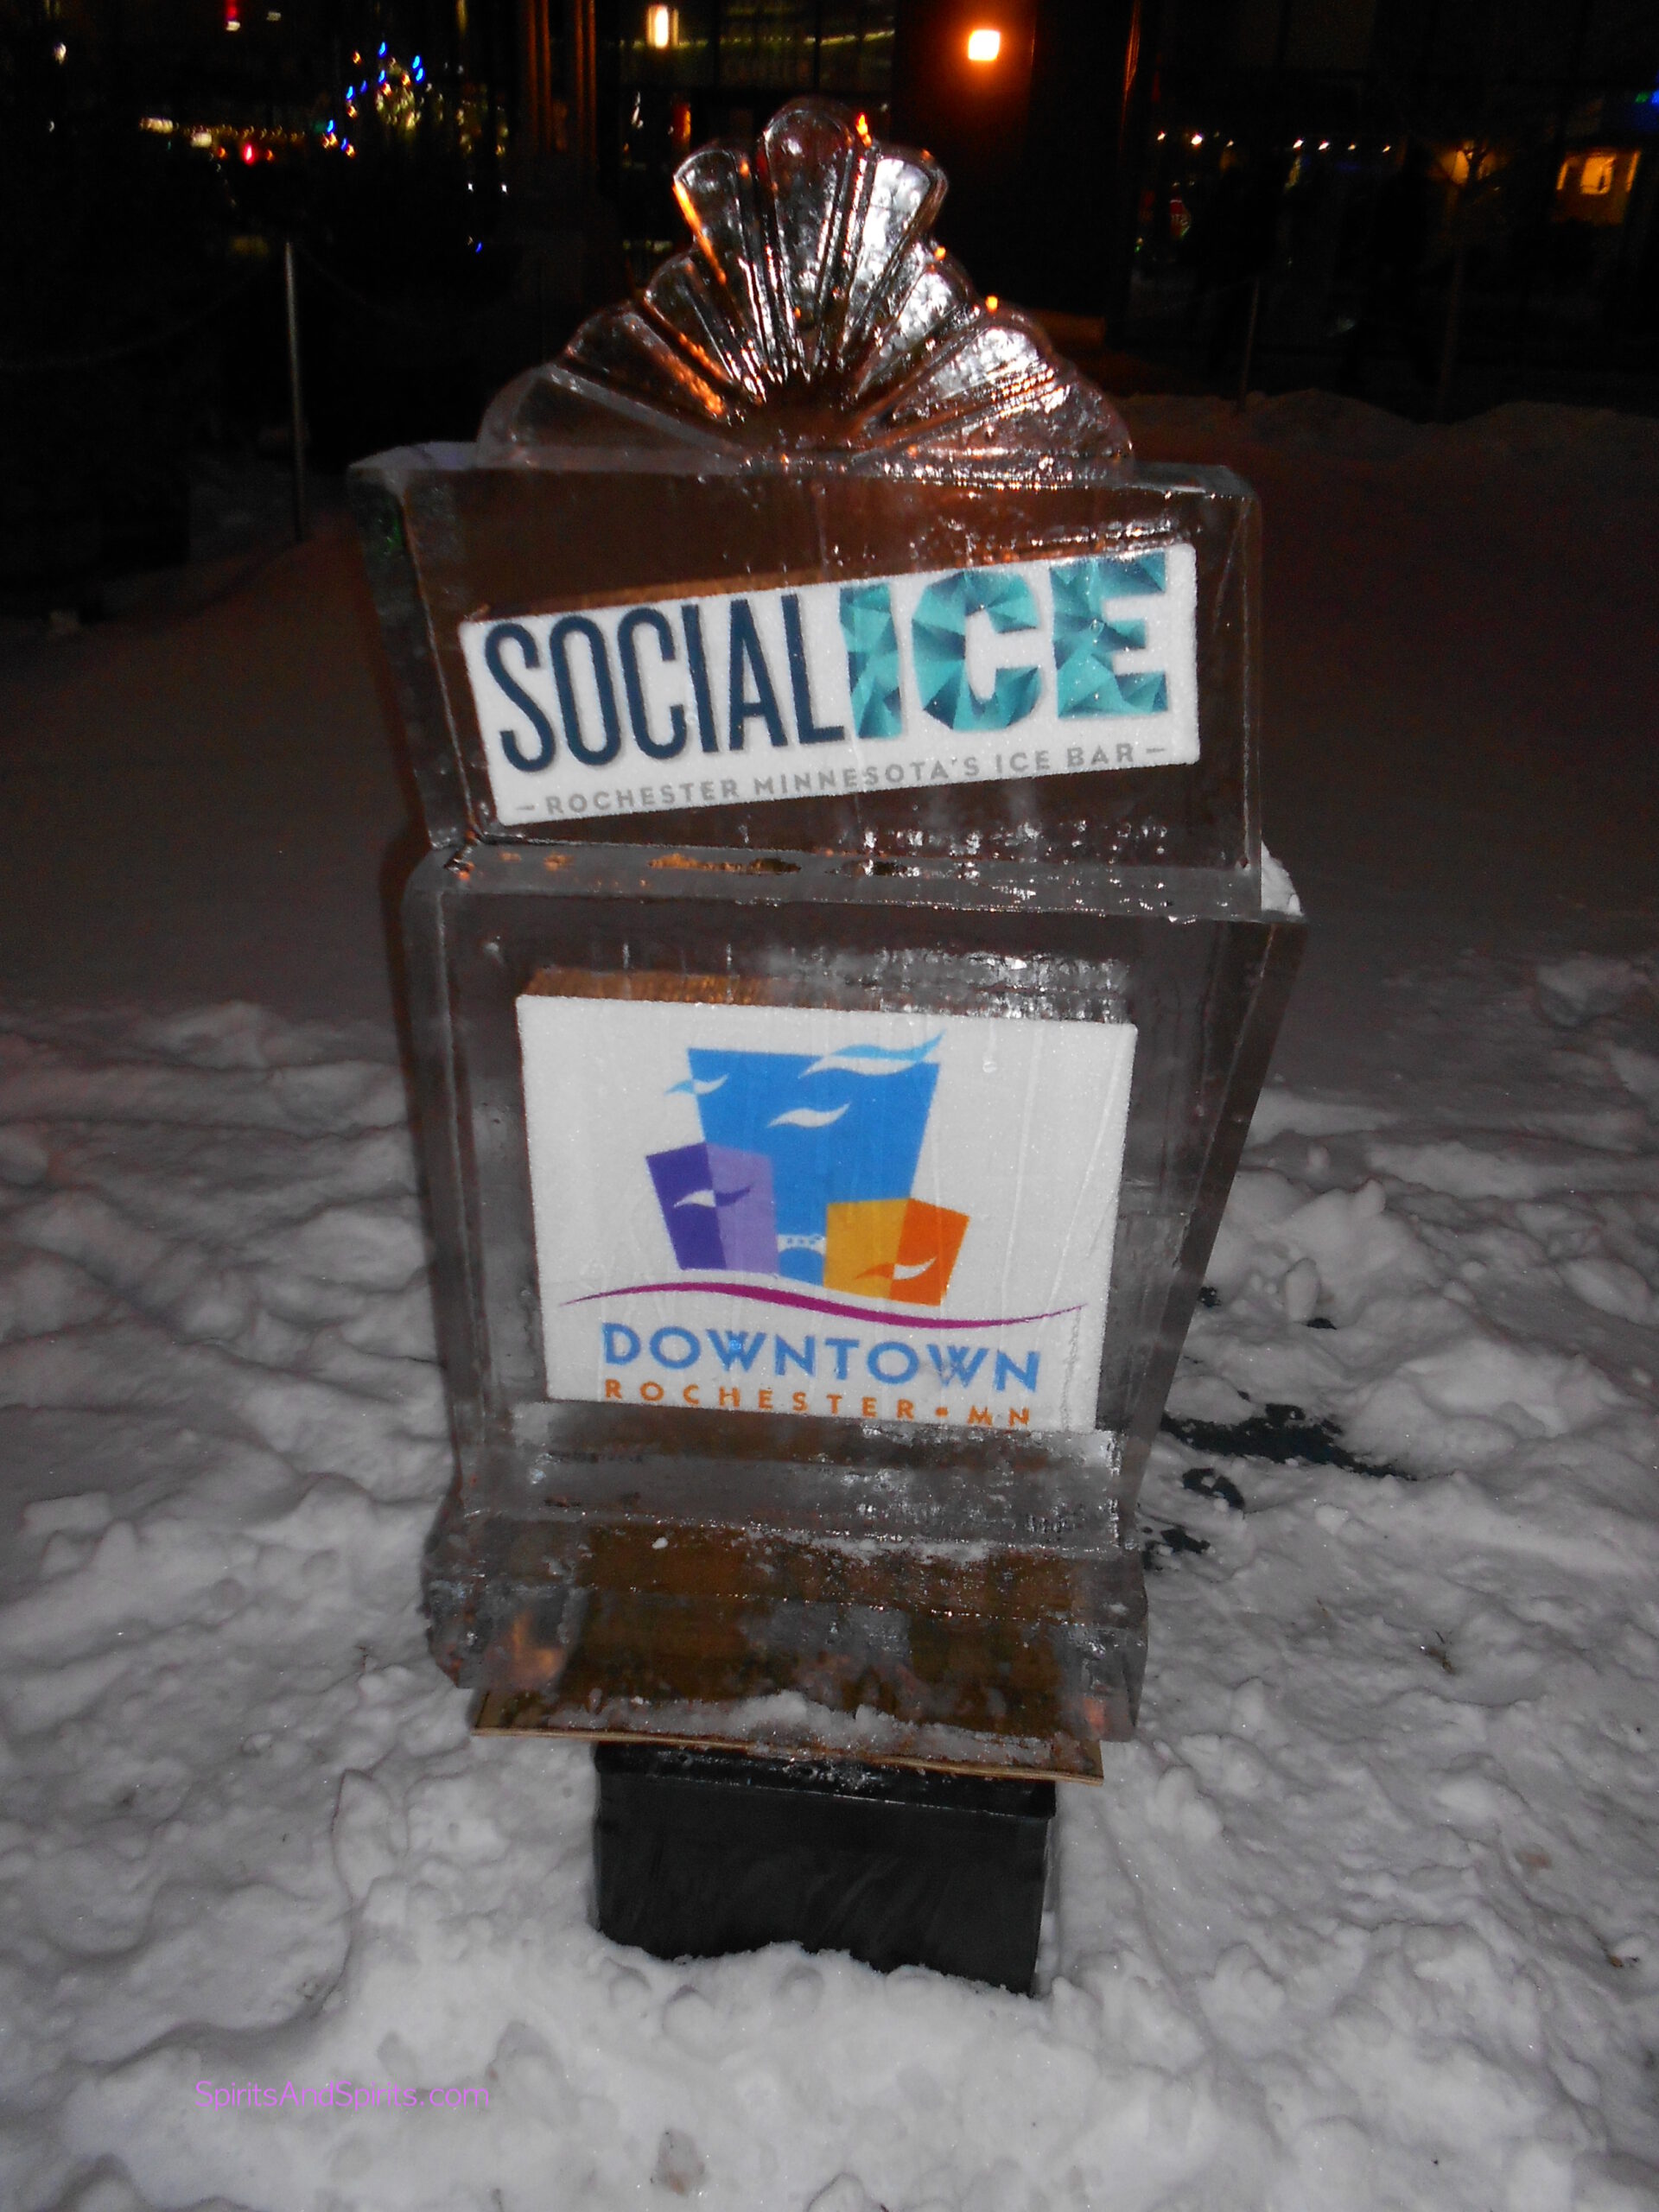 SocialICE is nice… ice or no ice